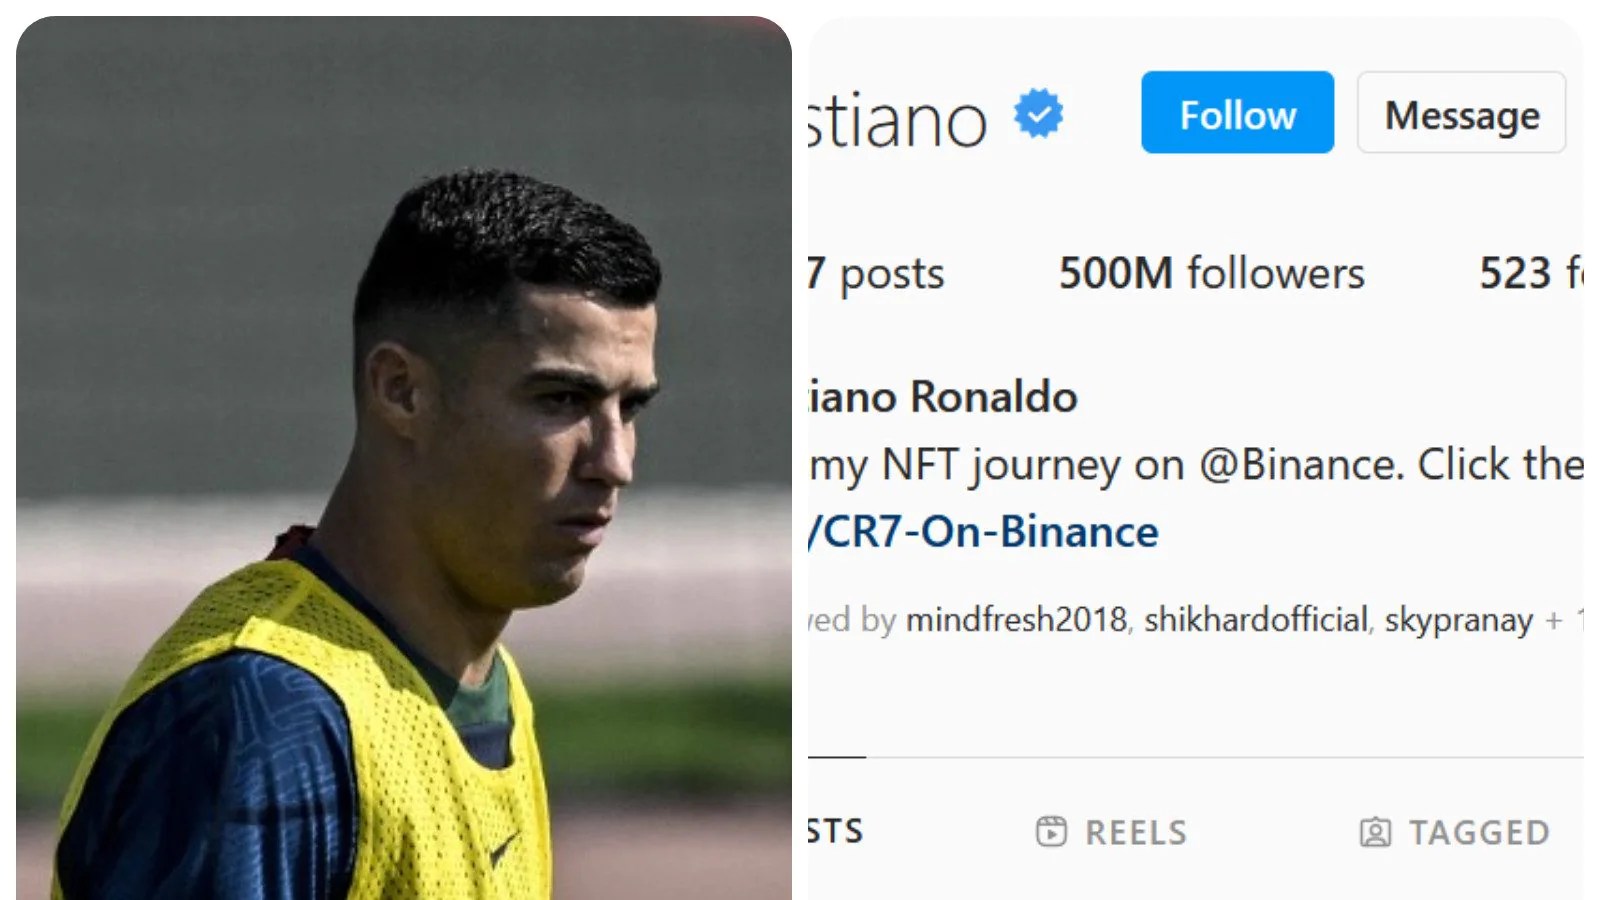 Most Followed on Instagram: Before FIFA World Cup, Cristiano Ronaldo pips Lionel Messi to BECOME first person to cross 500 MILLION followers on Instagram - Check OUT